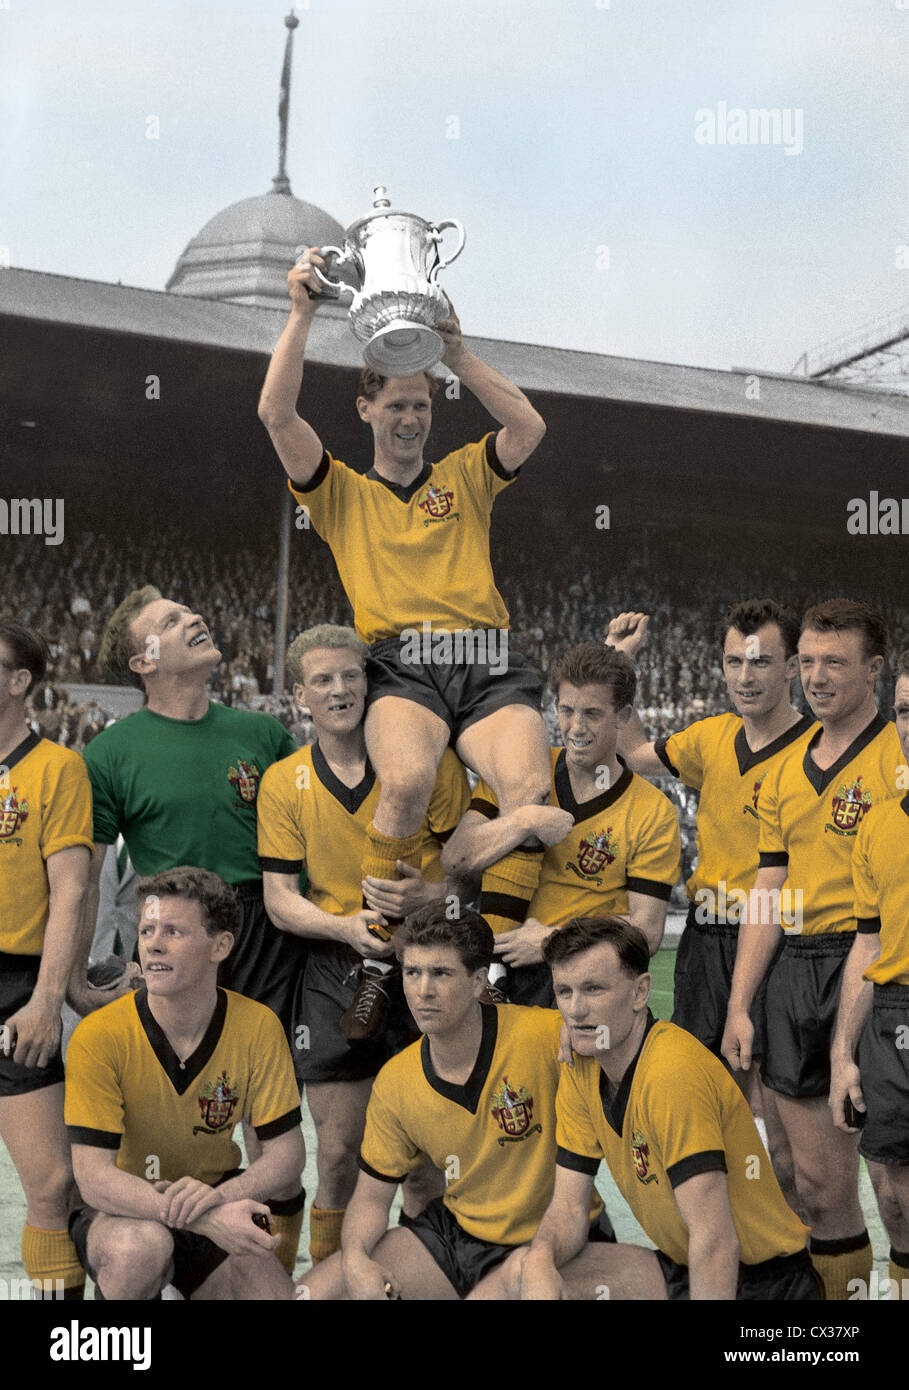 1960 FA Cup winners Wolverhampton Wanderers at Wembley 7/5/60 at Wembley Stadium. Wolves captain Bill Slater holds the cup with standing LtoR Malcolm Finlayson, Ron Flowers, Peter Broadbent, Eddie Clamp, George Showell, Norman Deeley. Kneeling Barry Stobart, Des Horne, Jimmy Murray. Stock Photo